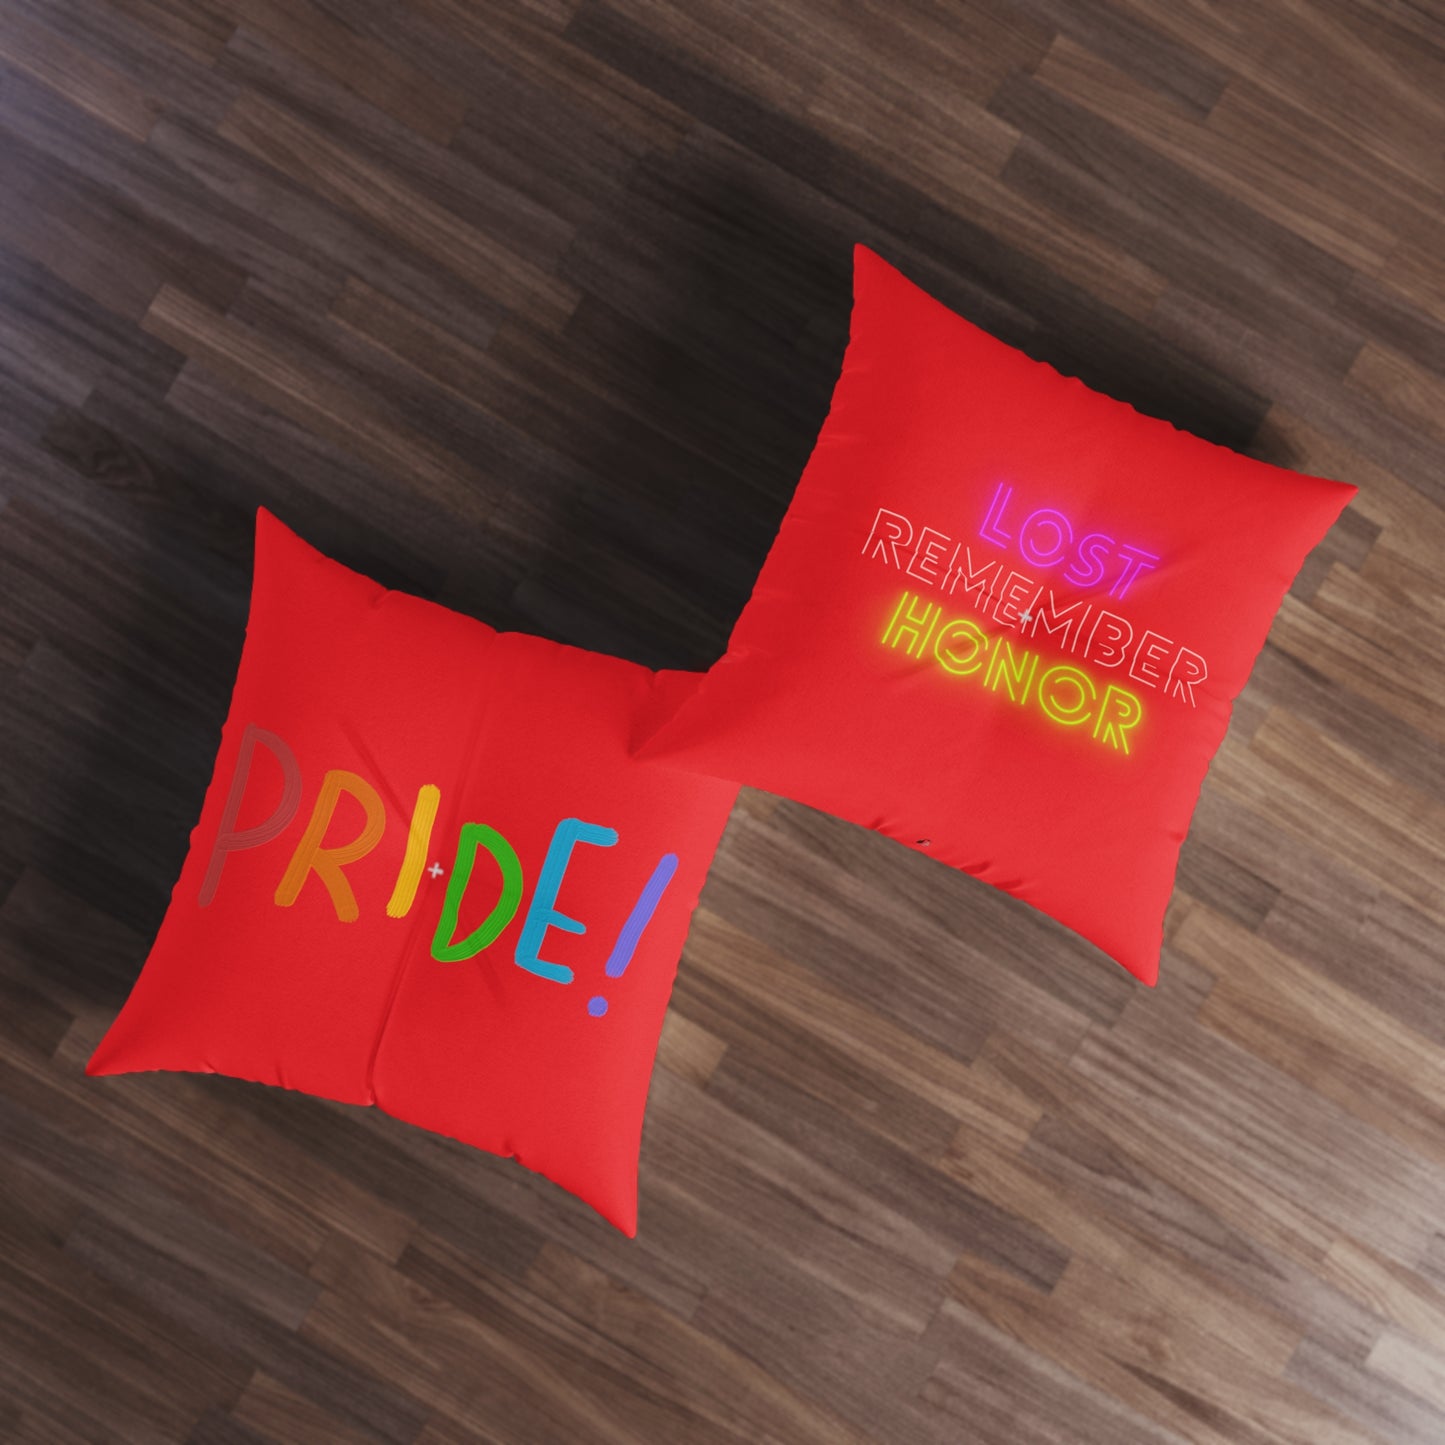 Tufted Floor Pillow, Square: LGBTQ Pride Red